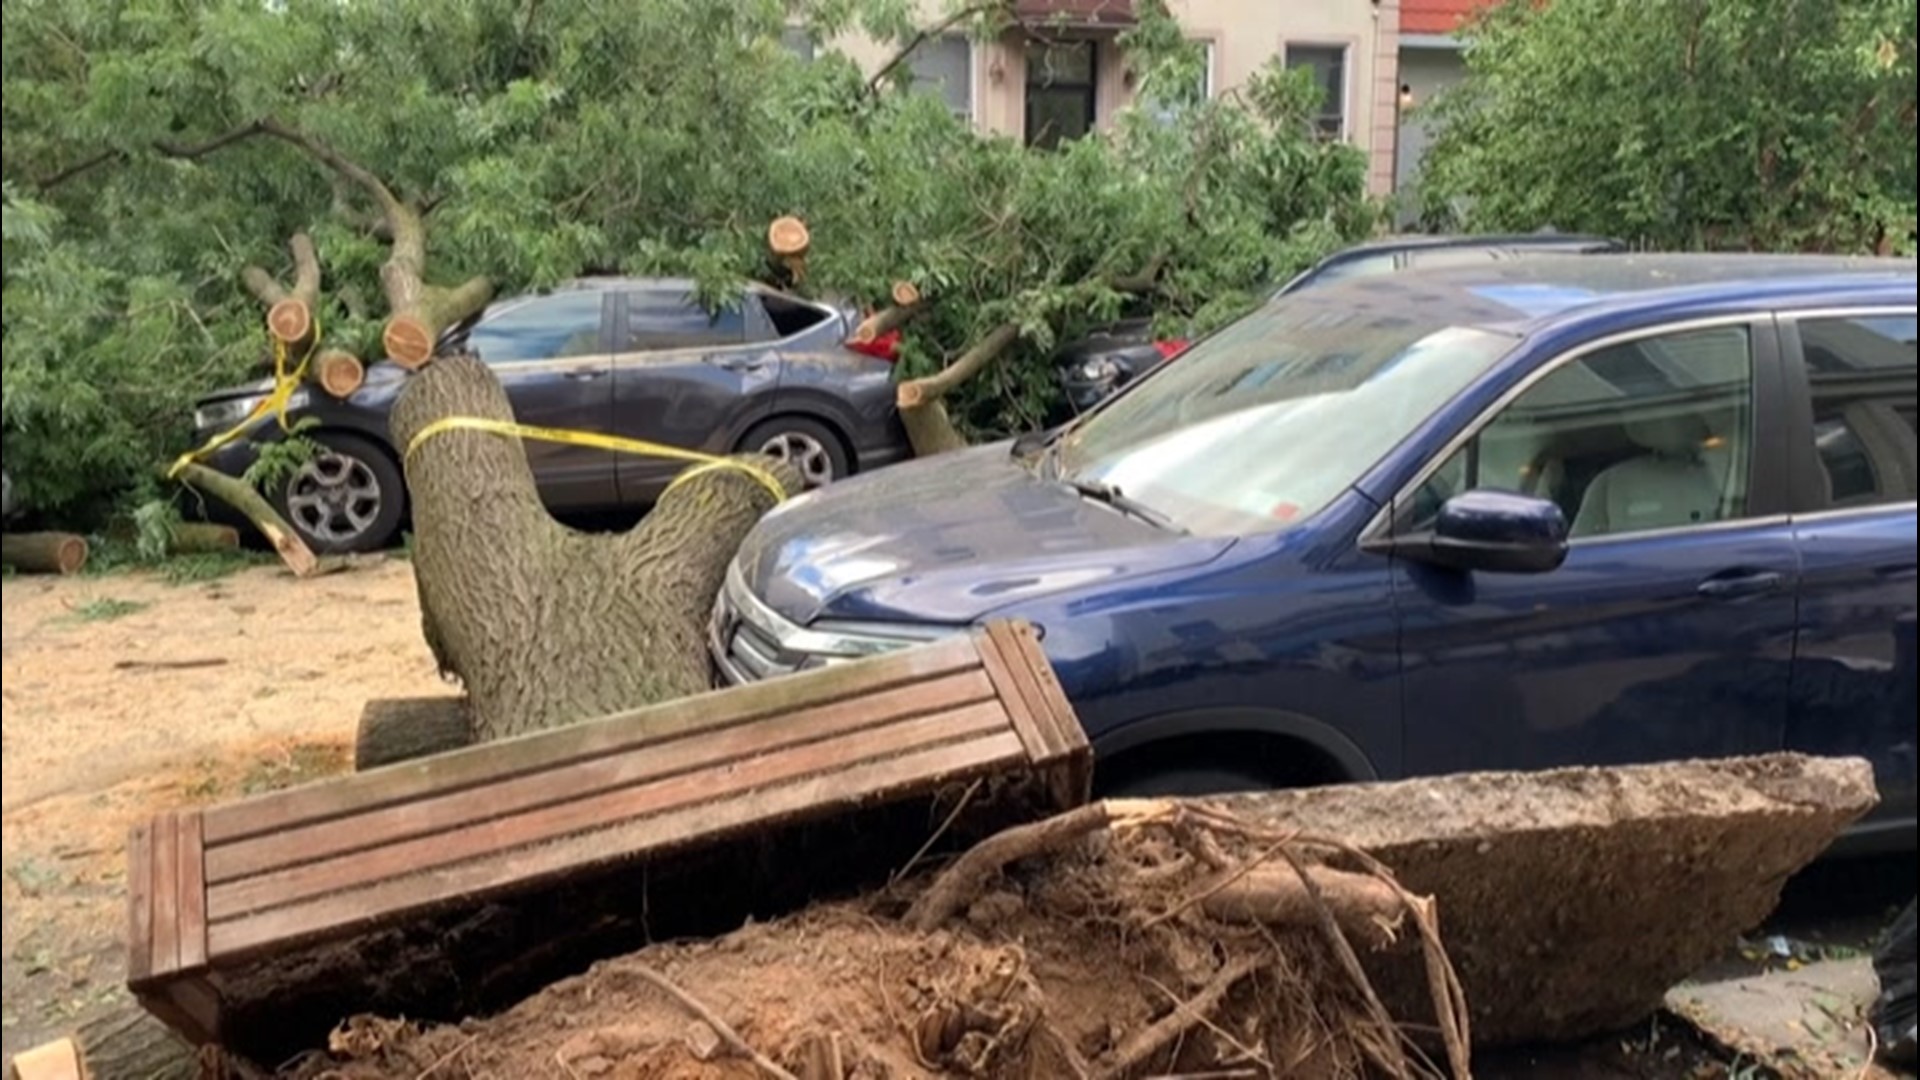 As Isaias wreaked havoc on New York, New York, on Aug. 4, multiple trees were toppled across the city by the storm's powerful winds. One person was killed as a result, after a tree fell on their car.